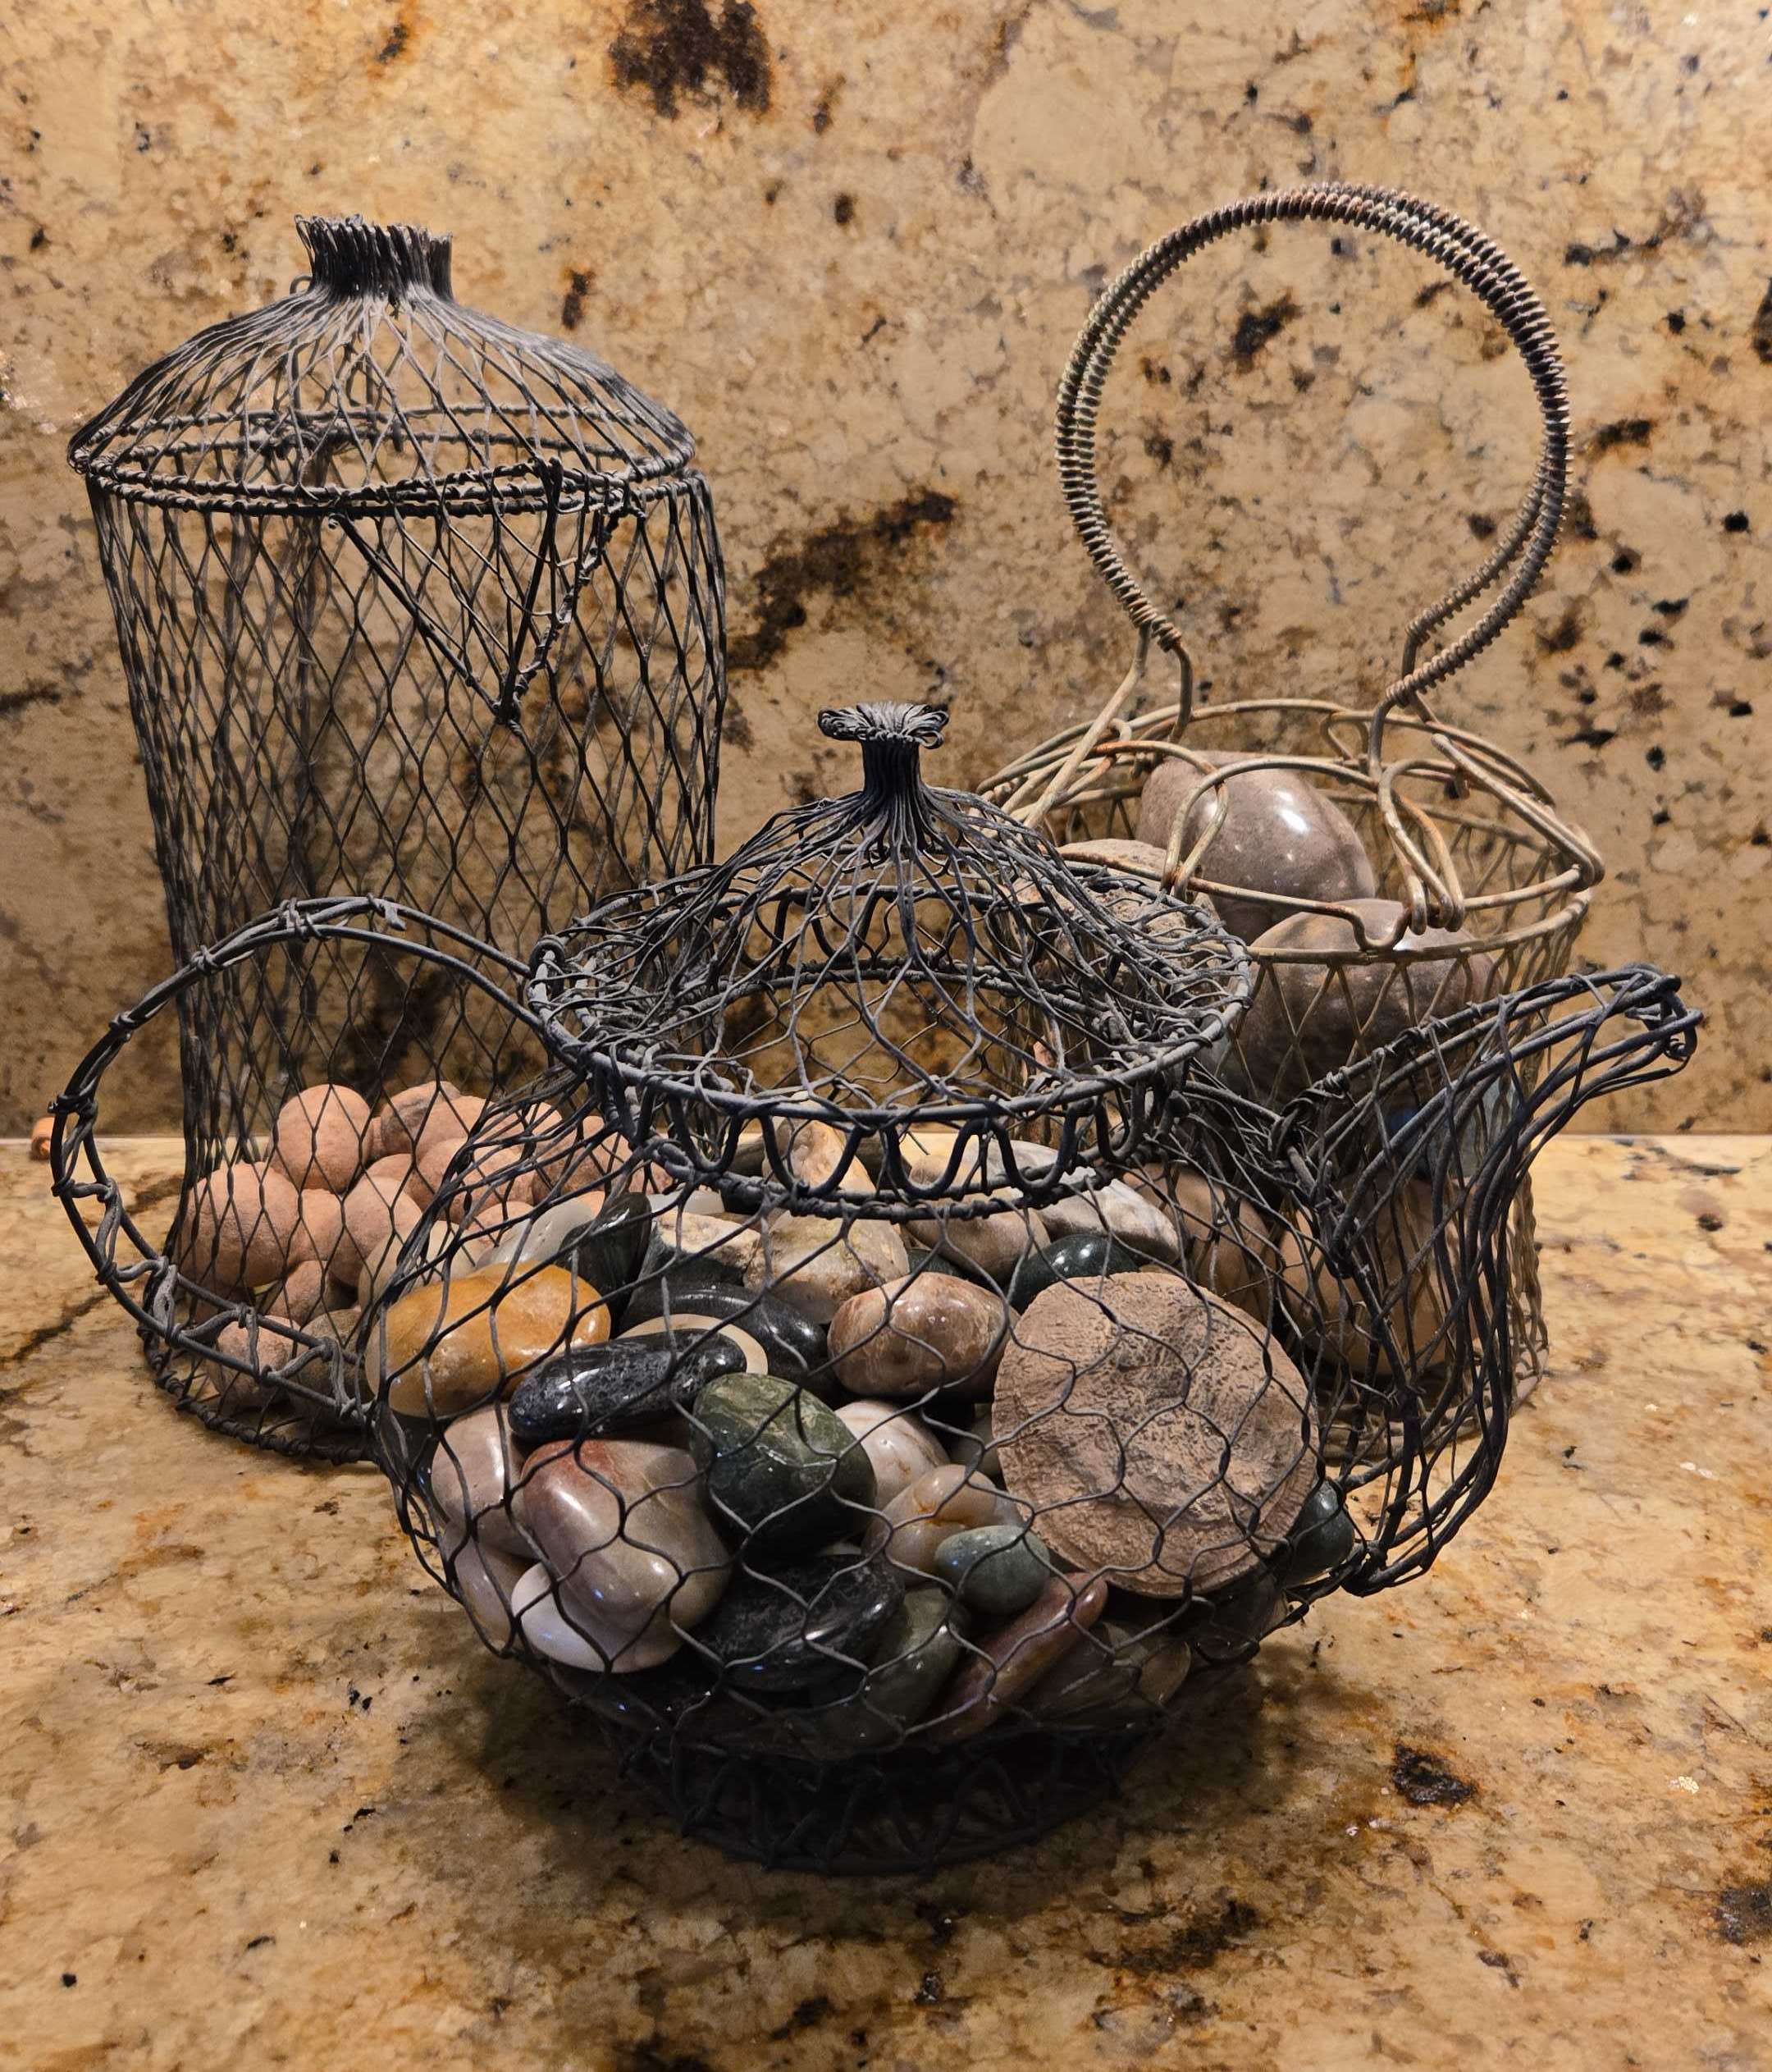 Variety-of-Wire-Baskets-with-Decorative-Polished-Stones-Rocks